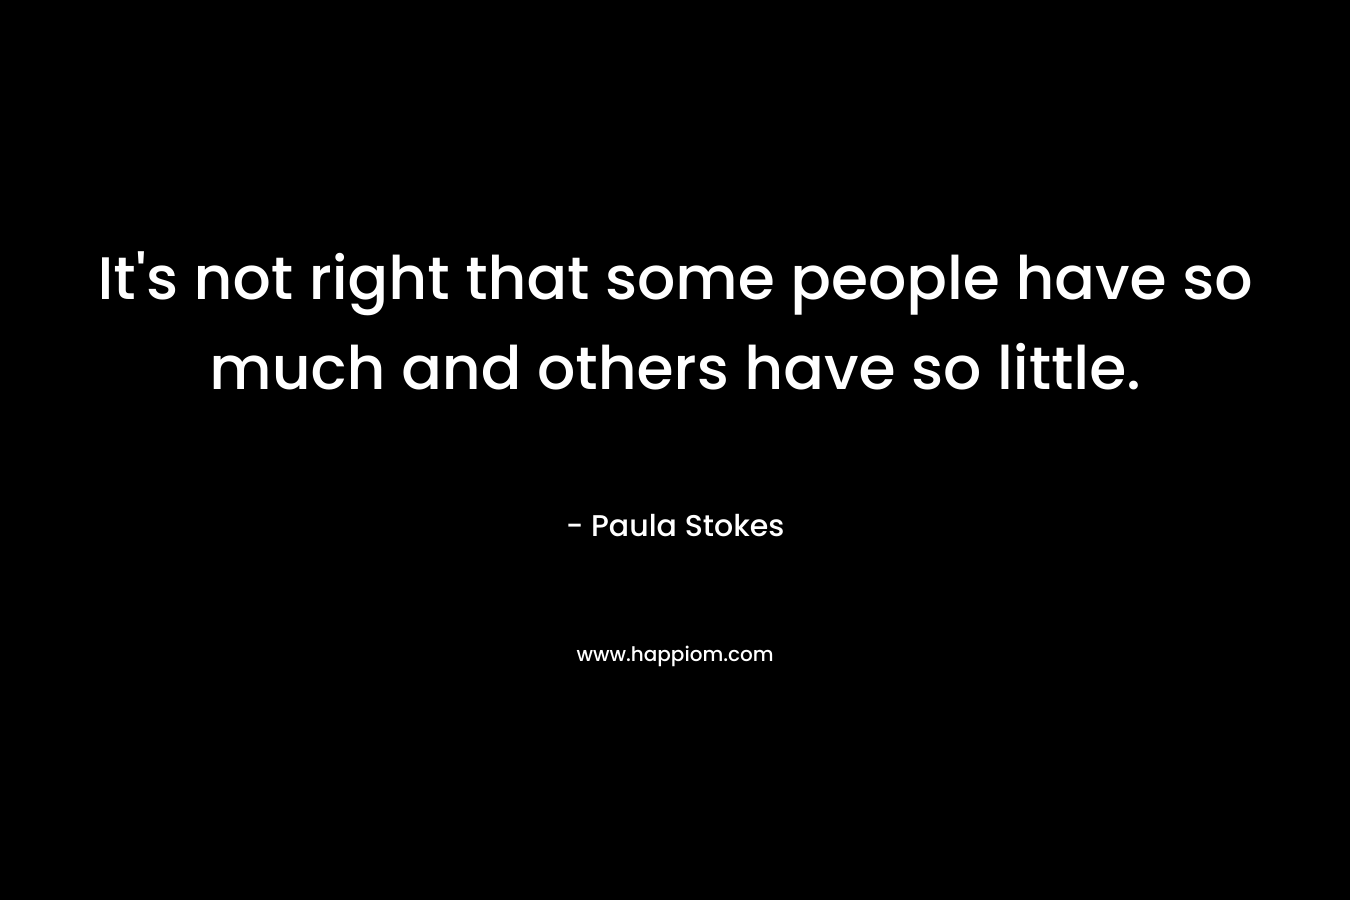 It’s not right that some people have so much and others have so little. – Paula Stokes